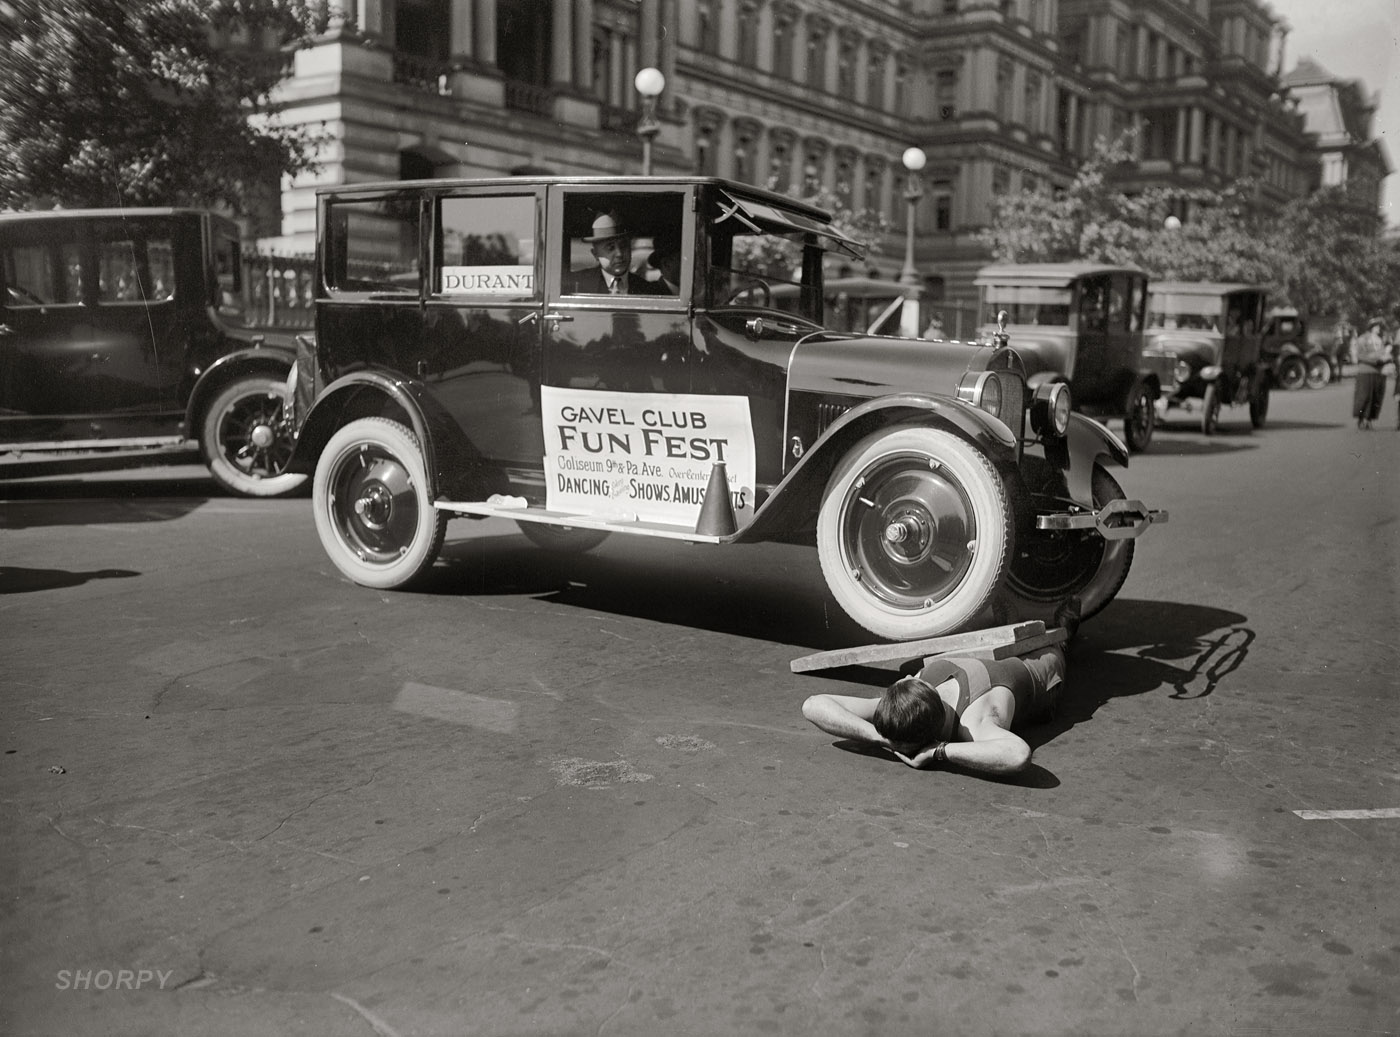 "Galen Gough, October 5, 1923." The Miracle Strong Man under two tons of fun outside the State, War and Navy building in Washington, D.C. National Photo Company Collection glass negative. View full size.